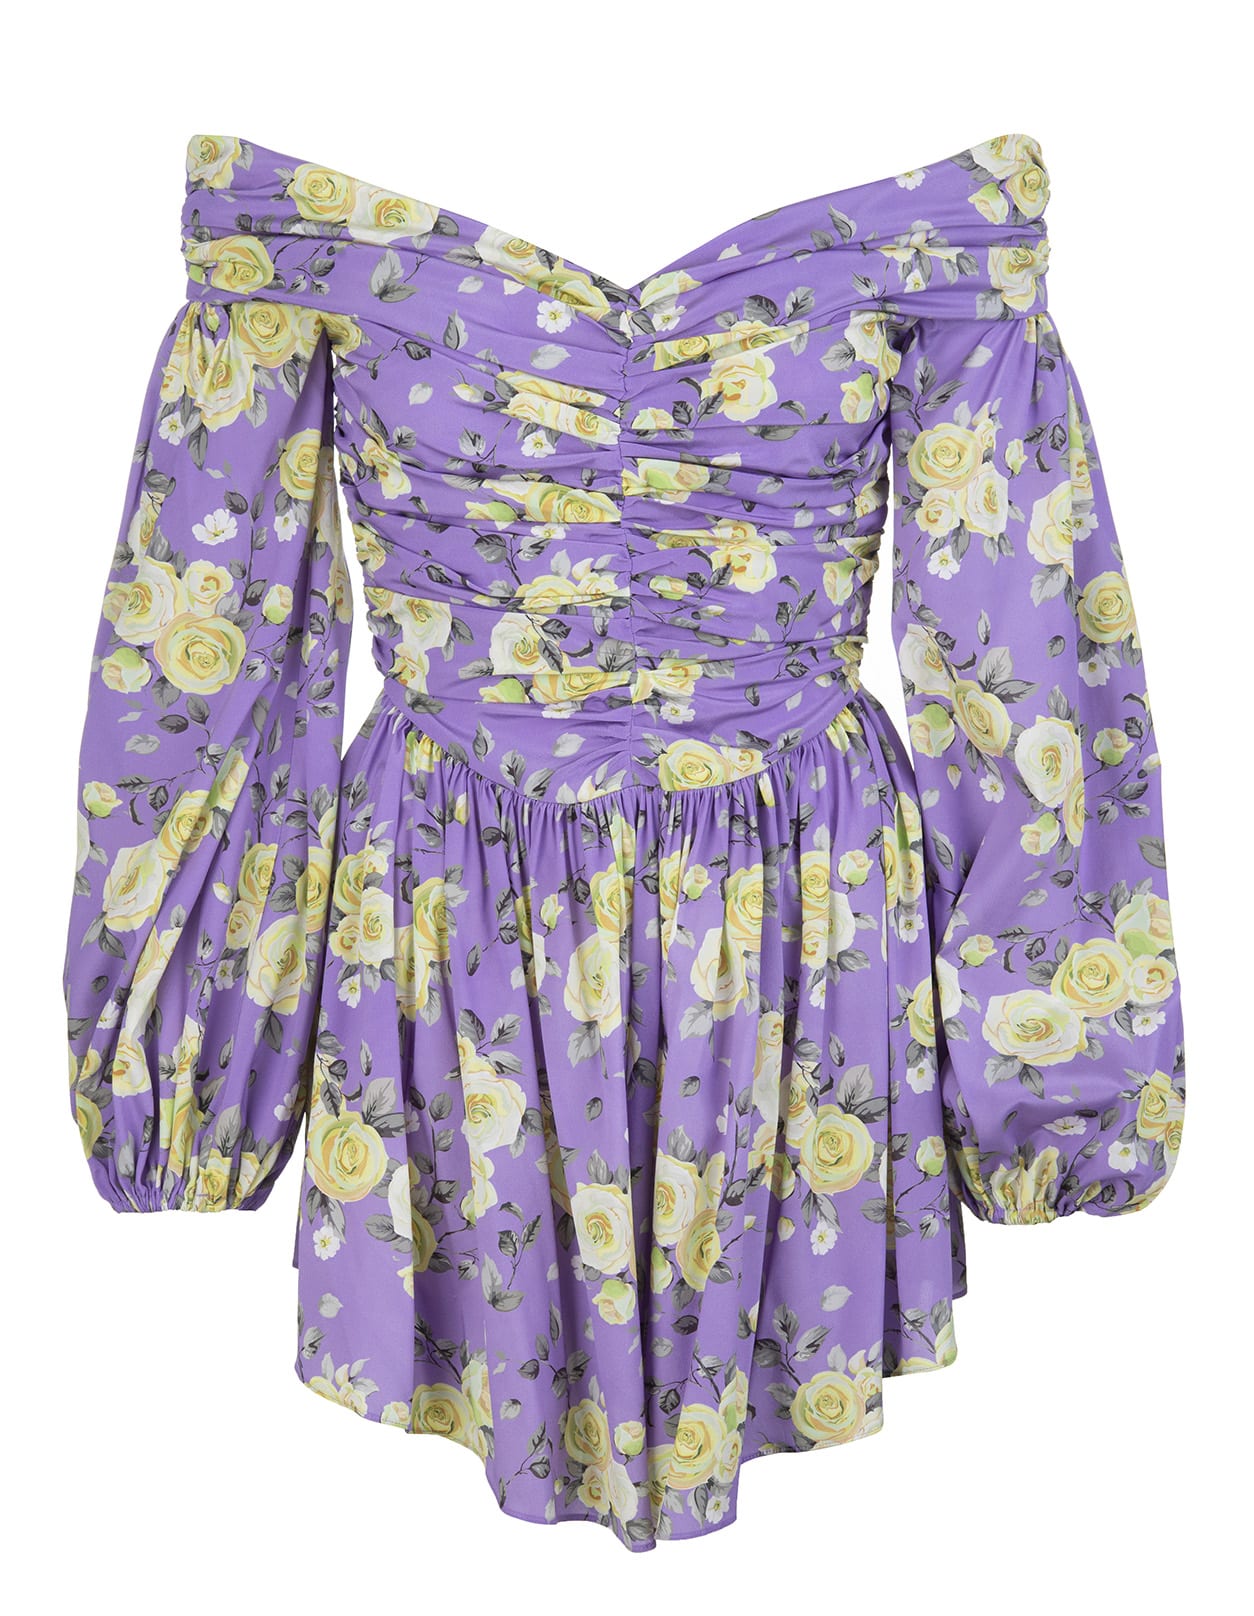 GIUSEPPE DI MORABITO SHORT ASYMMETRICAL LILAC FLORAL DRESS WITH OFF SHOULDERS,179DR-127 ST12-24